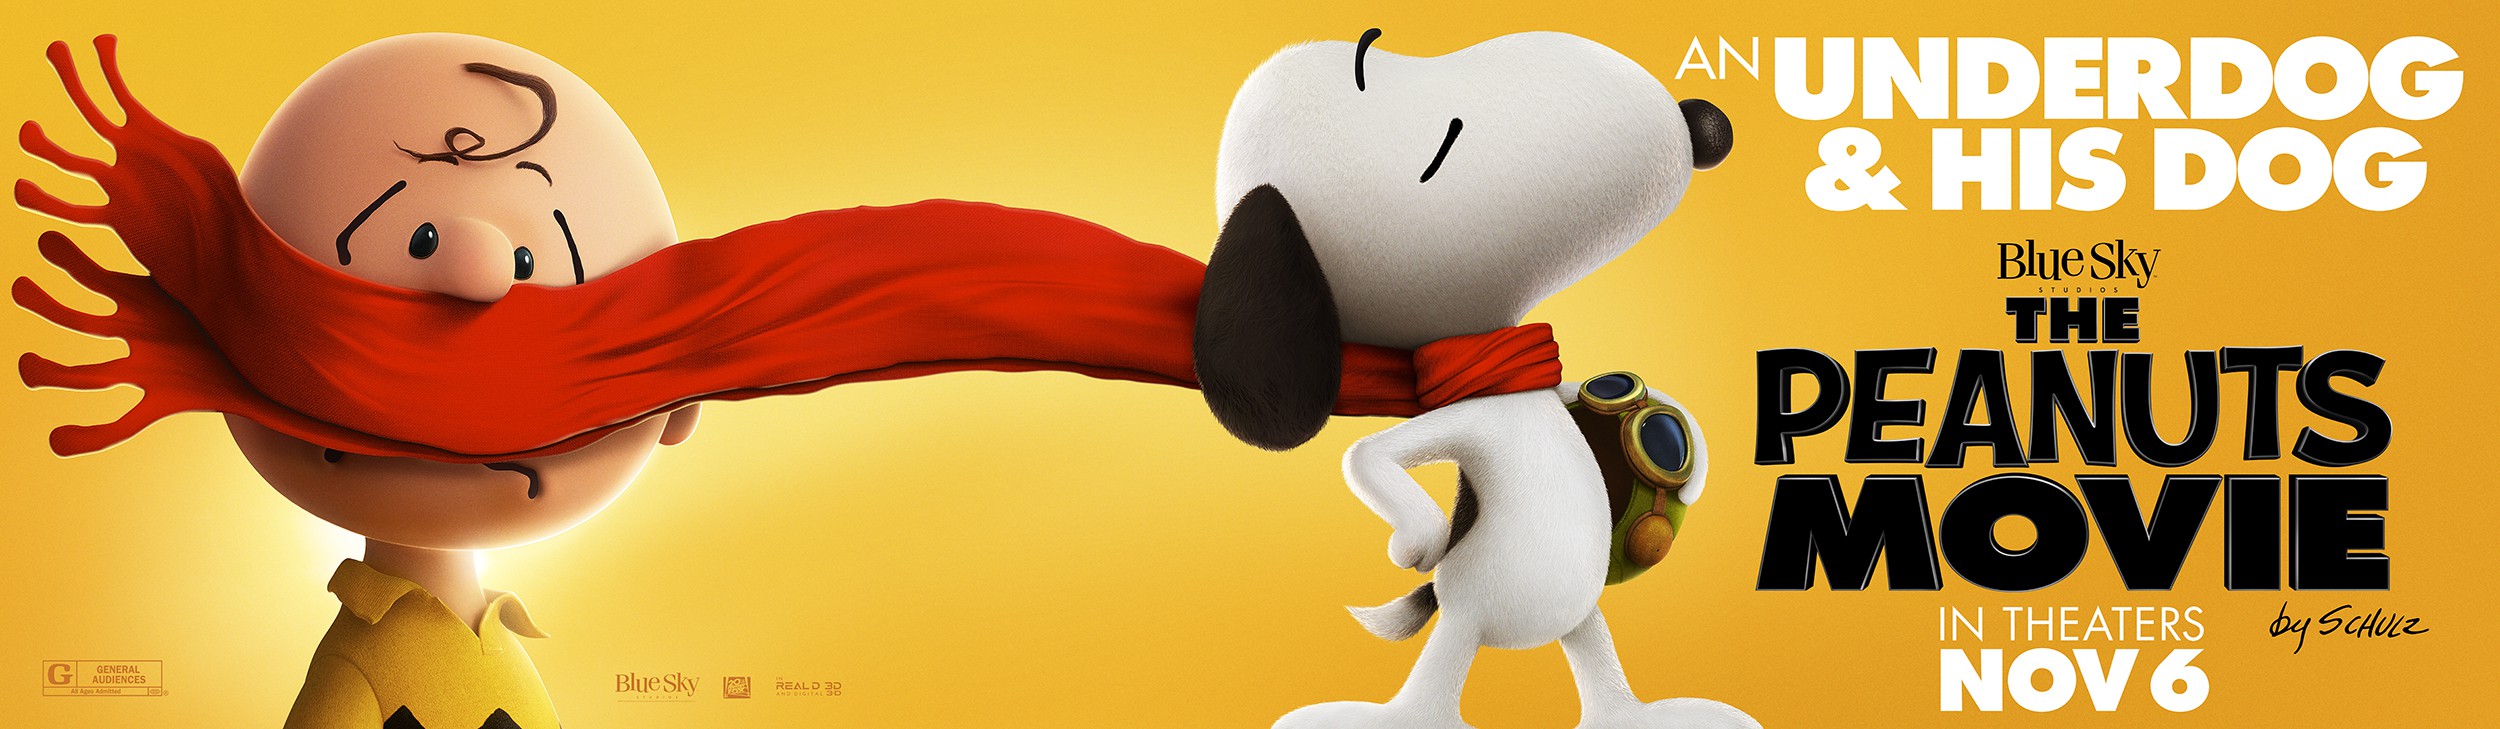 Mega Sized Movie Poster Image for Snoopy and Charlie Brown: The Peanuts Movie (#37 of 40)